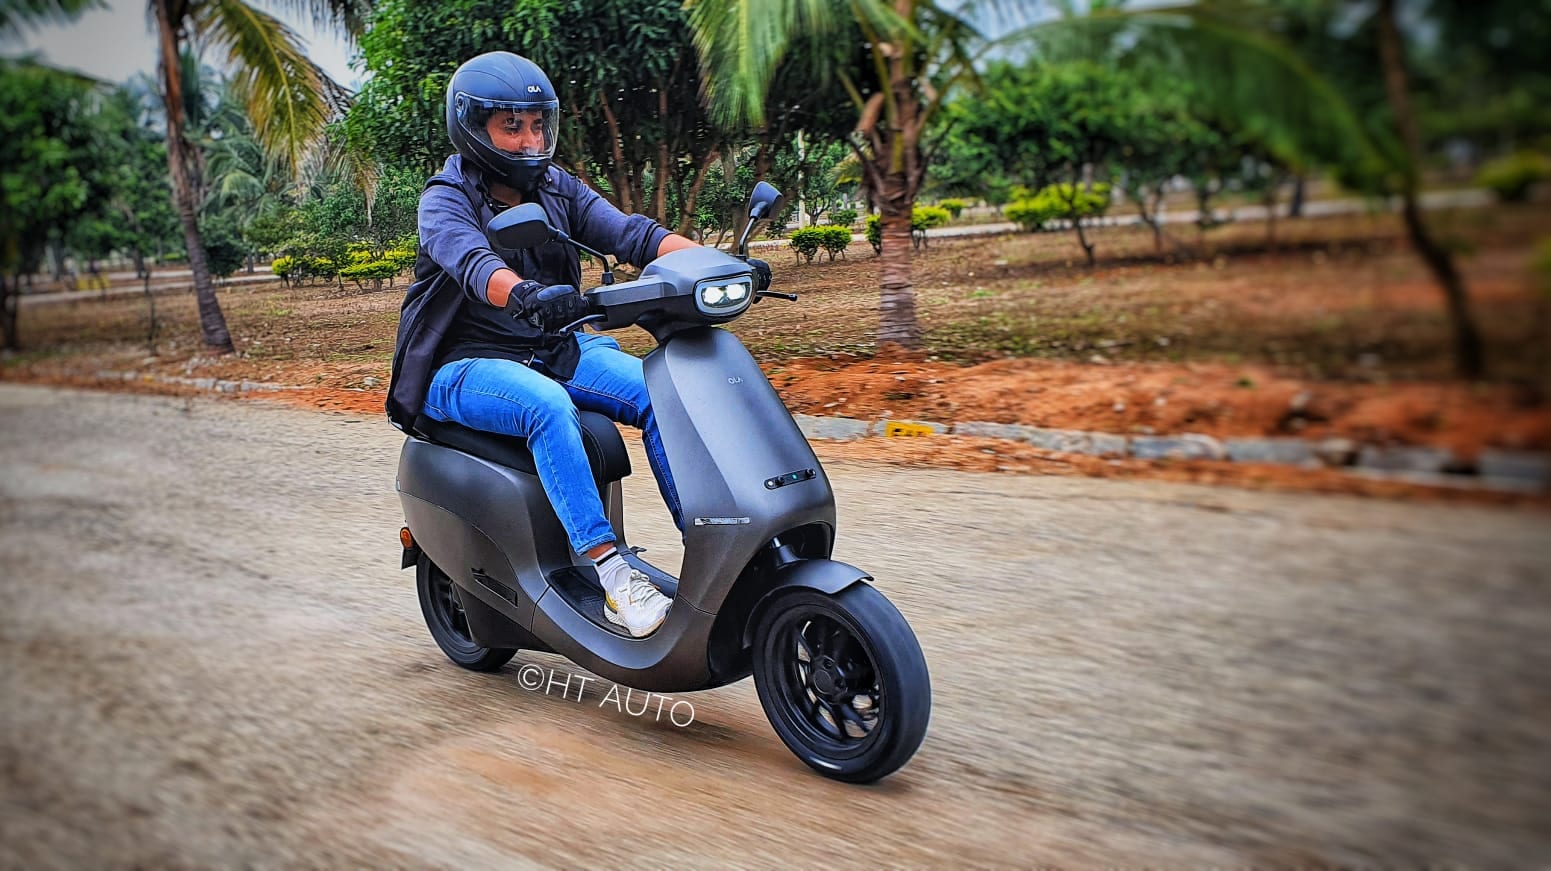 Ola Electric made its debut in the EV space in India with the launch of its first products S1 and S1 Pro electric scooters.